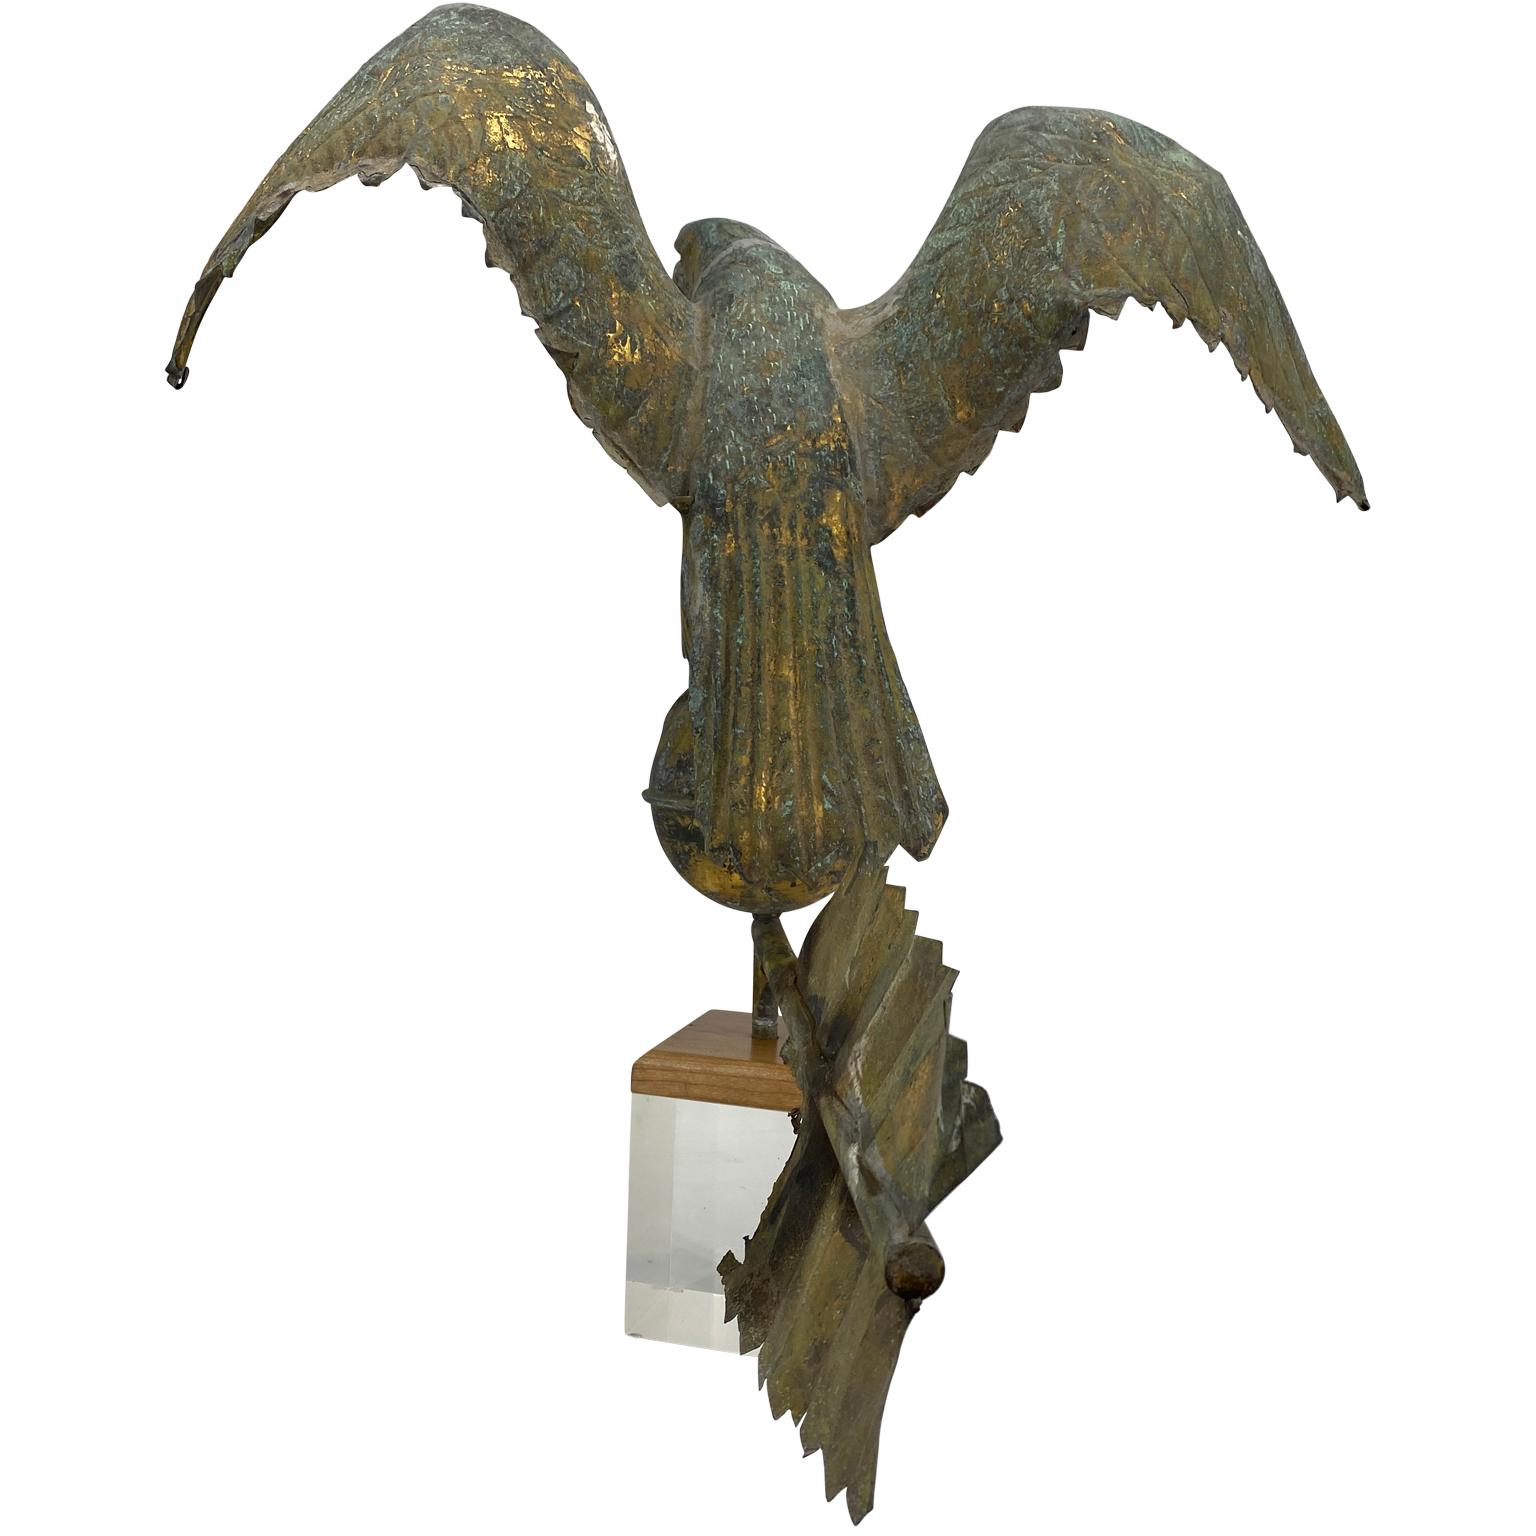 Hand-Crafted Antique Gilt Copper Eagle Weathervane on Lucite Stand, American, circa 1850